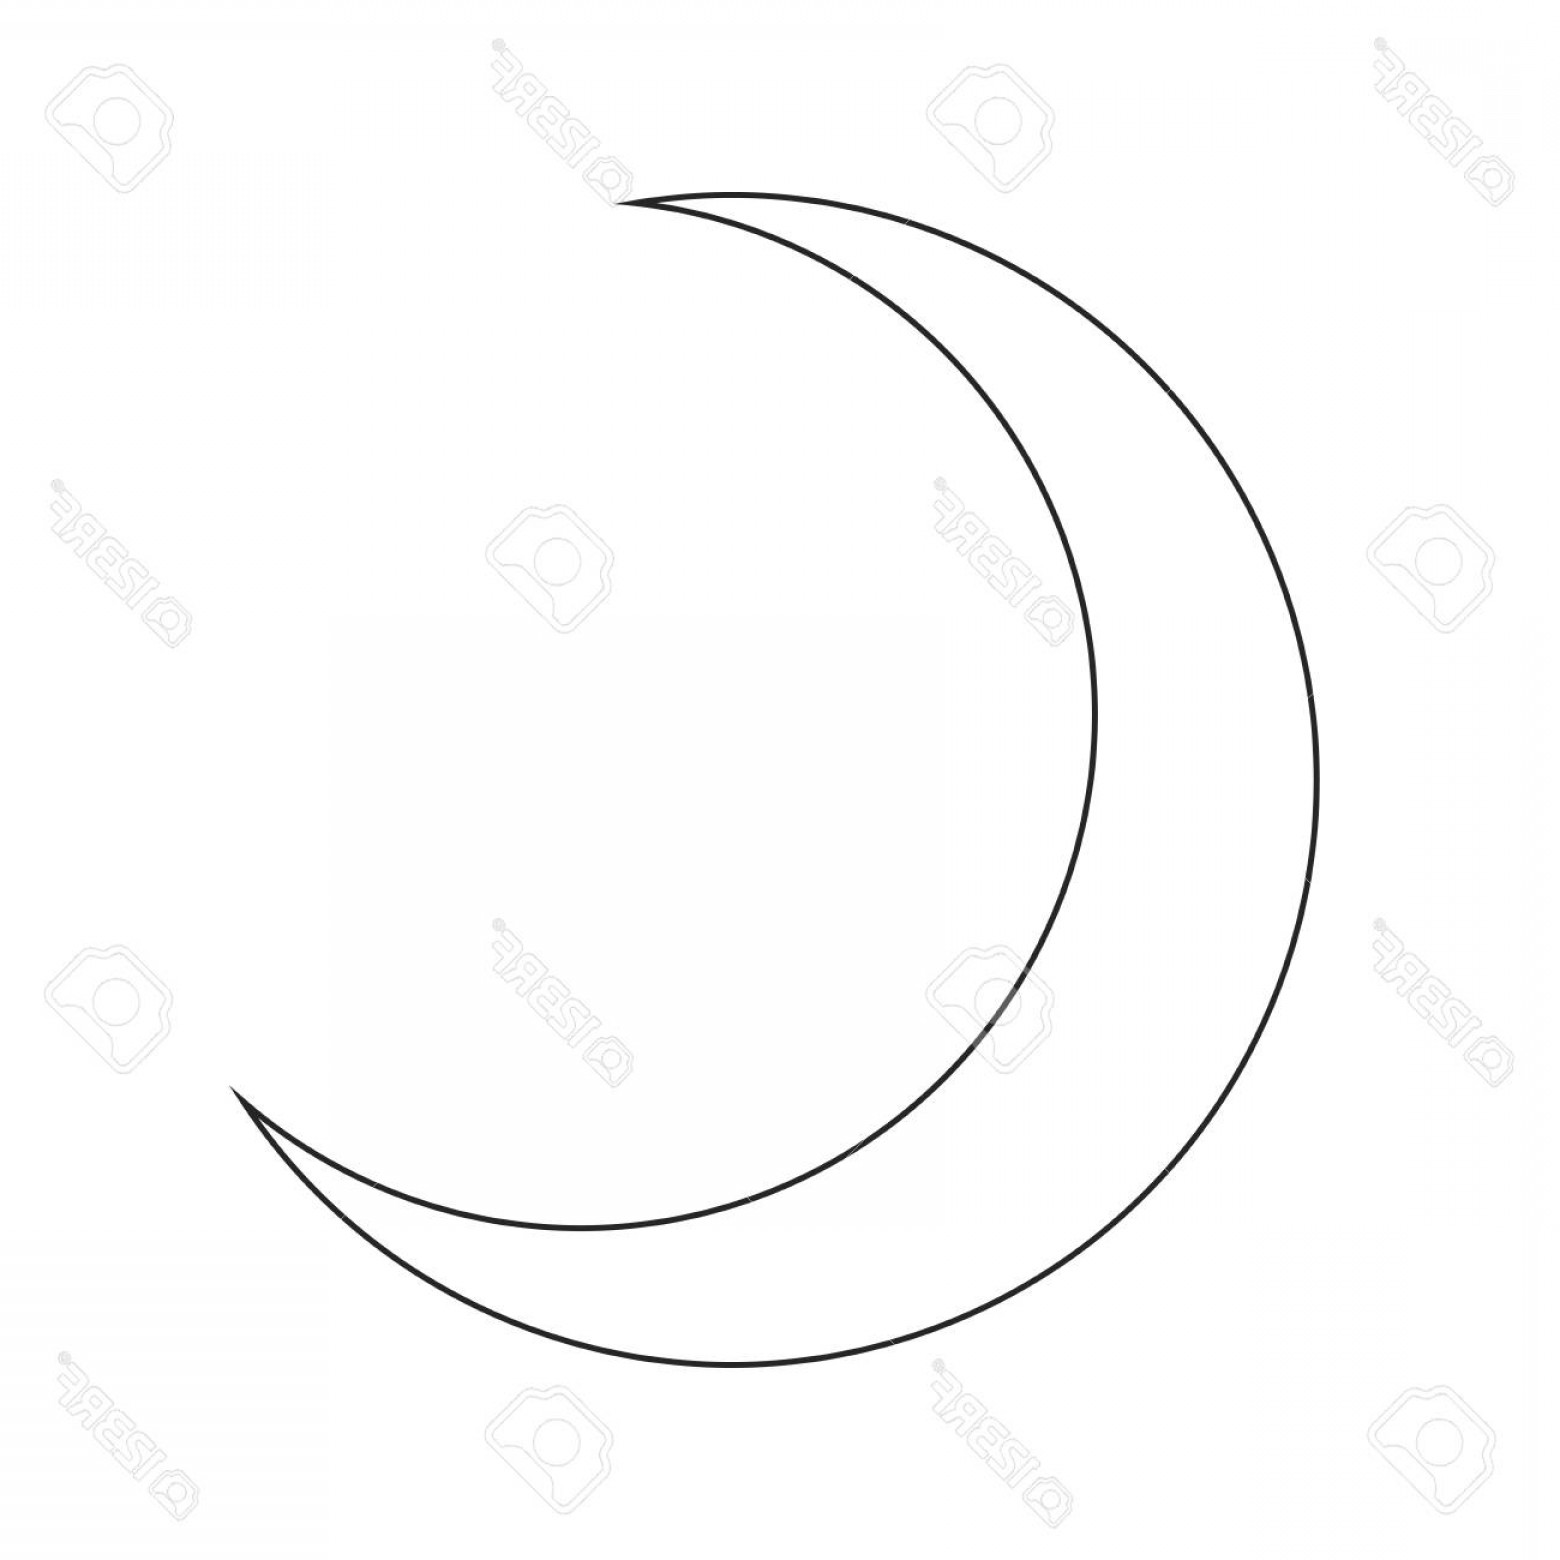 Crescent Moon Vector Art At Collection Of Crescent Moon Vector Art Free For